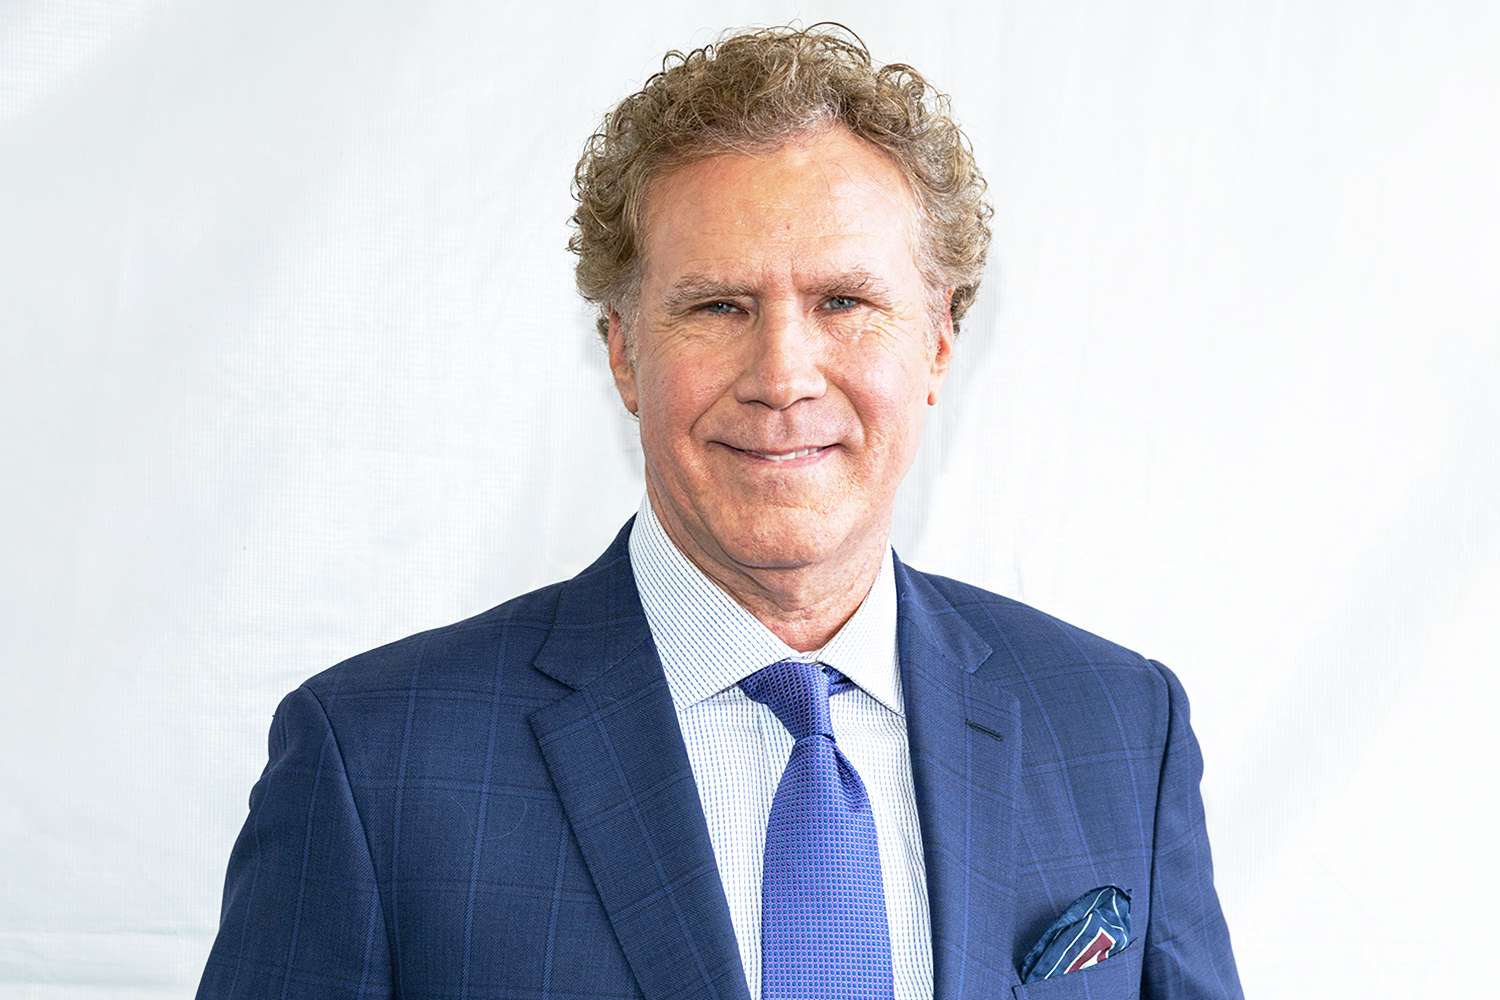 Will Ferrell Recalls Being 'So Embarrassed' by His Real Name Growing Up: 'It Wasn't My Choice'